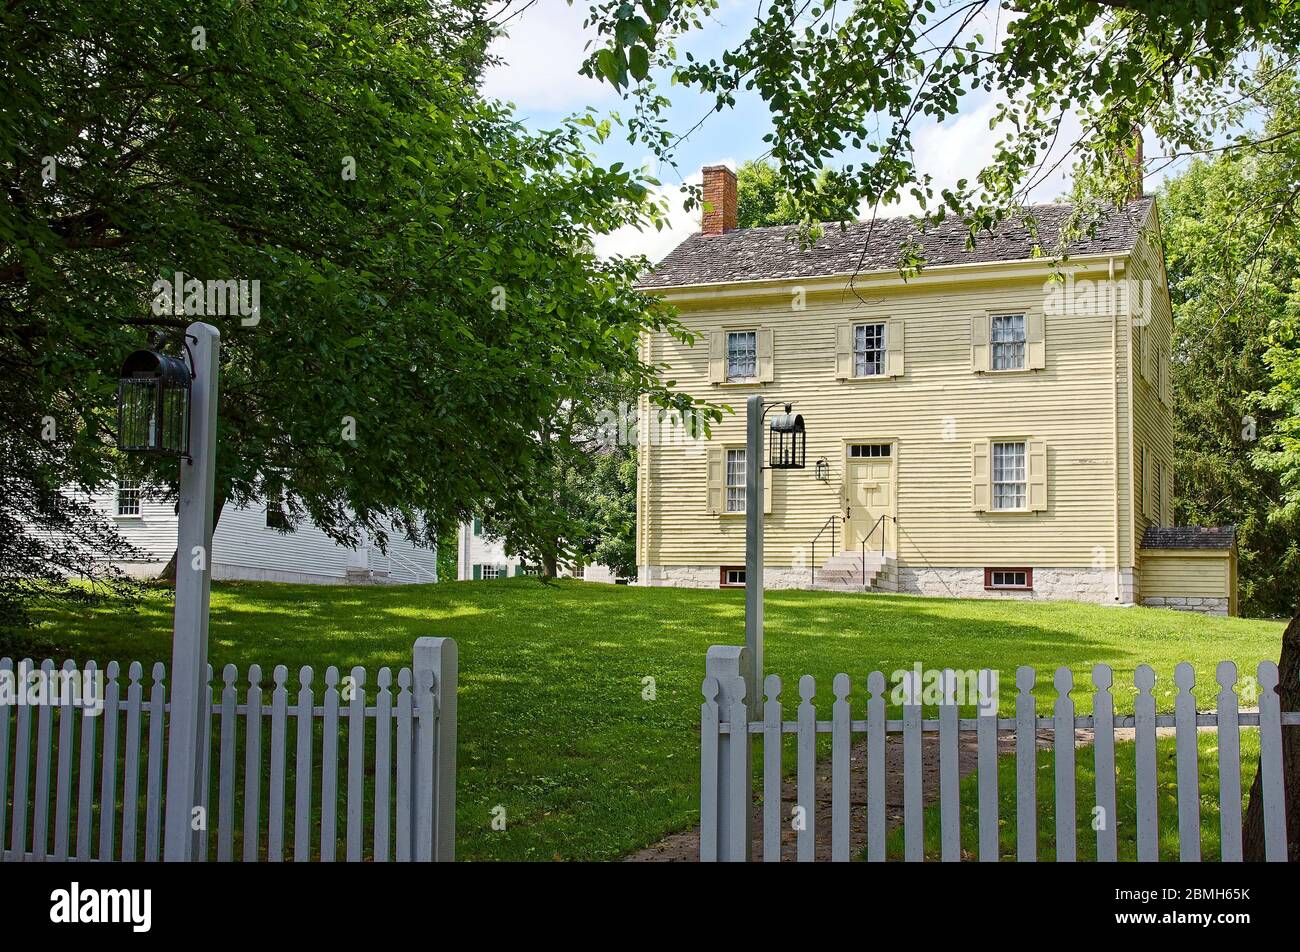 Ministry's Workshop, 1821, clapboard building, plain, old, picket fence, hanging lanterns, trees, sun, shade, Shaker Village of Pleasant Hill; defunct Stock Photo